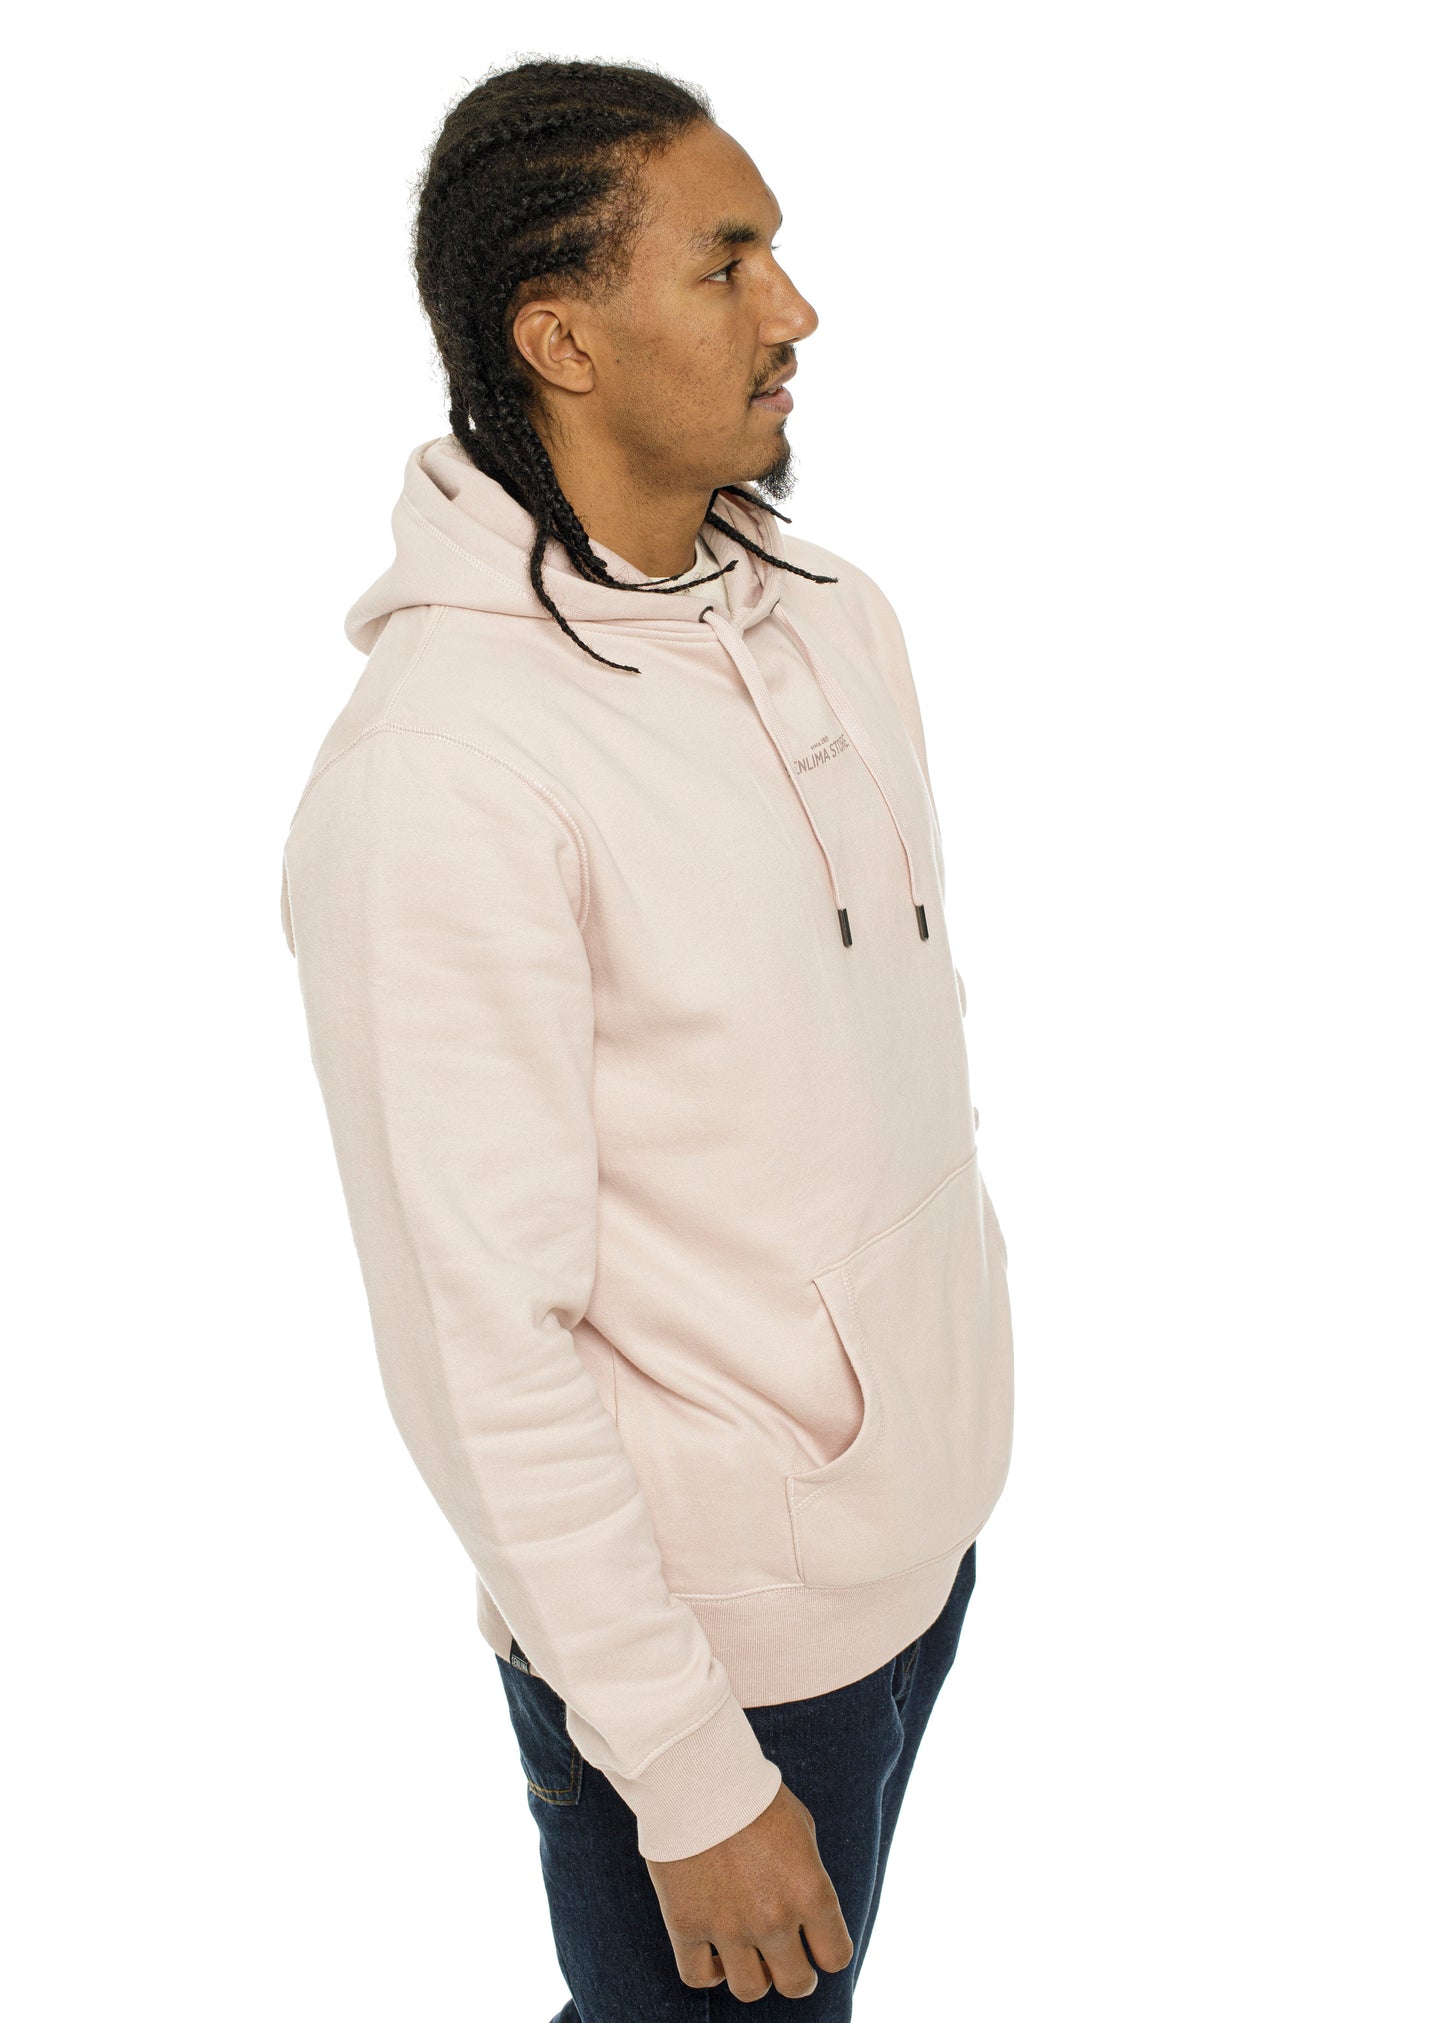 Inverted Soft-touch Hoodie